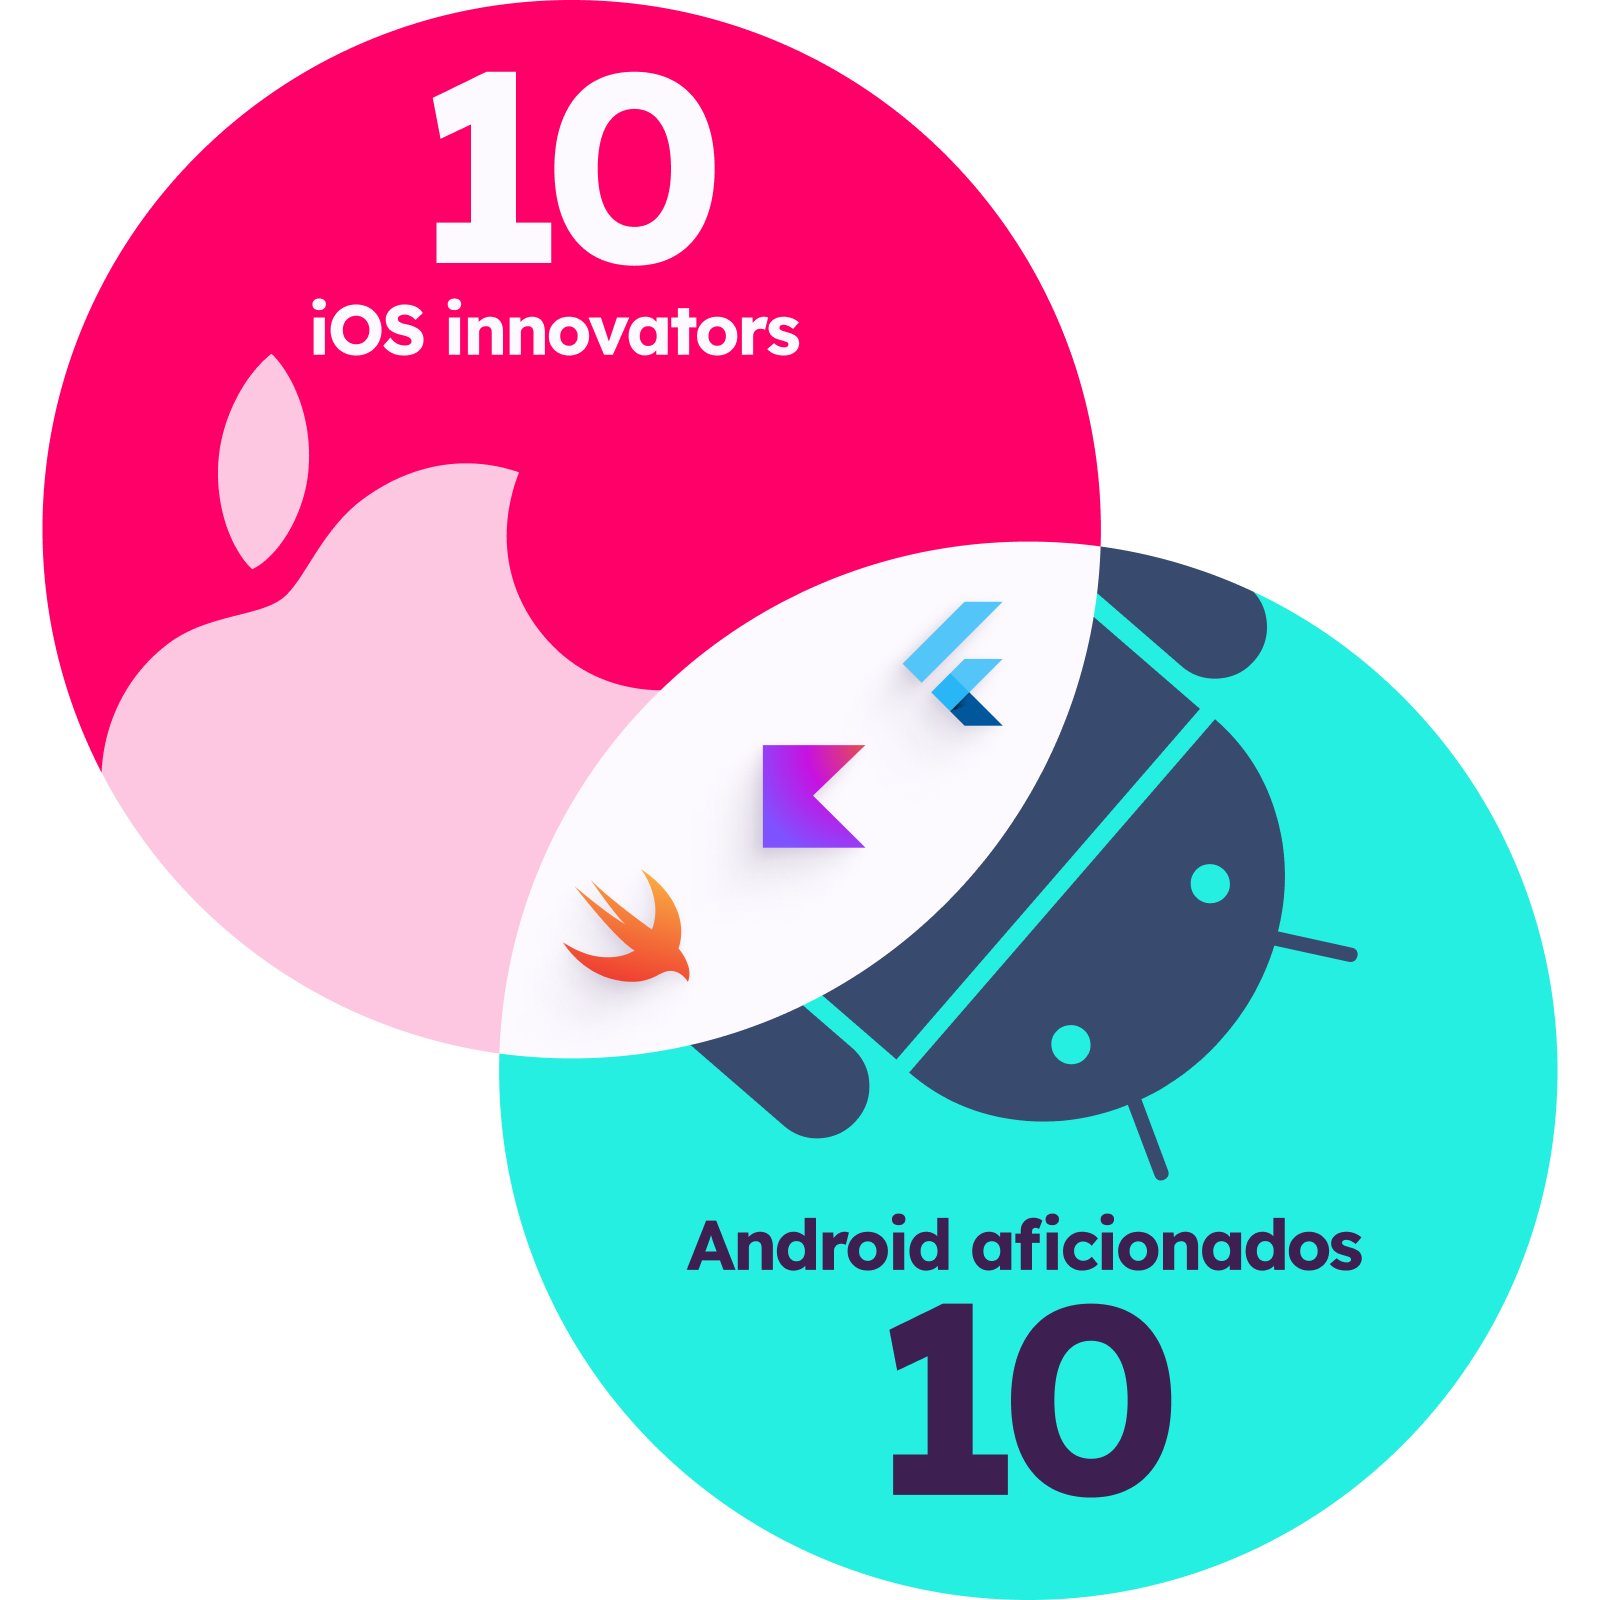 iOS logo with text "10 iOS innovators" overlapping Android logo with text "Android aficionados"